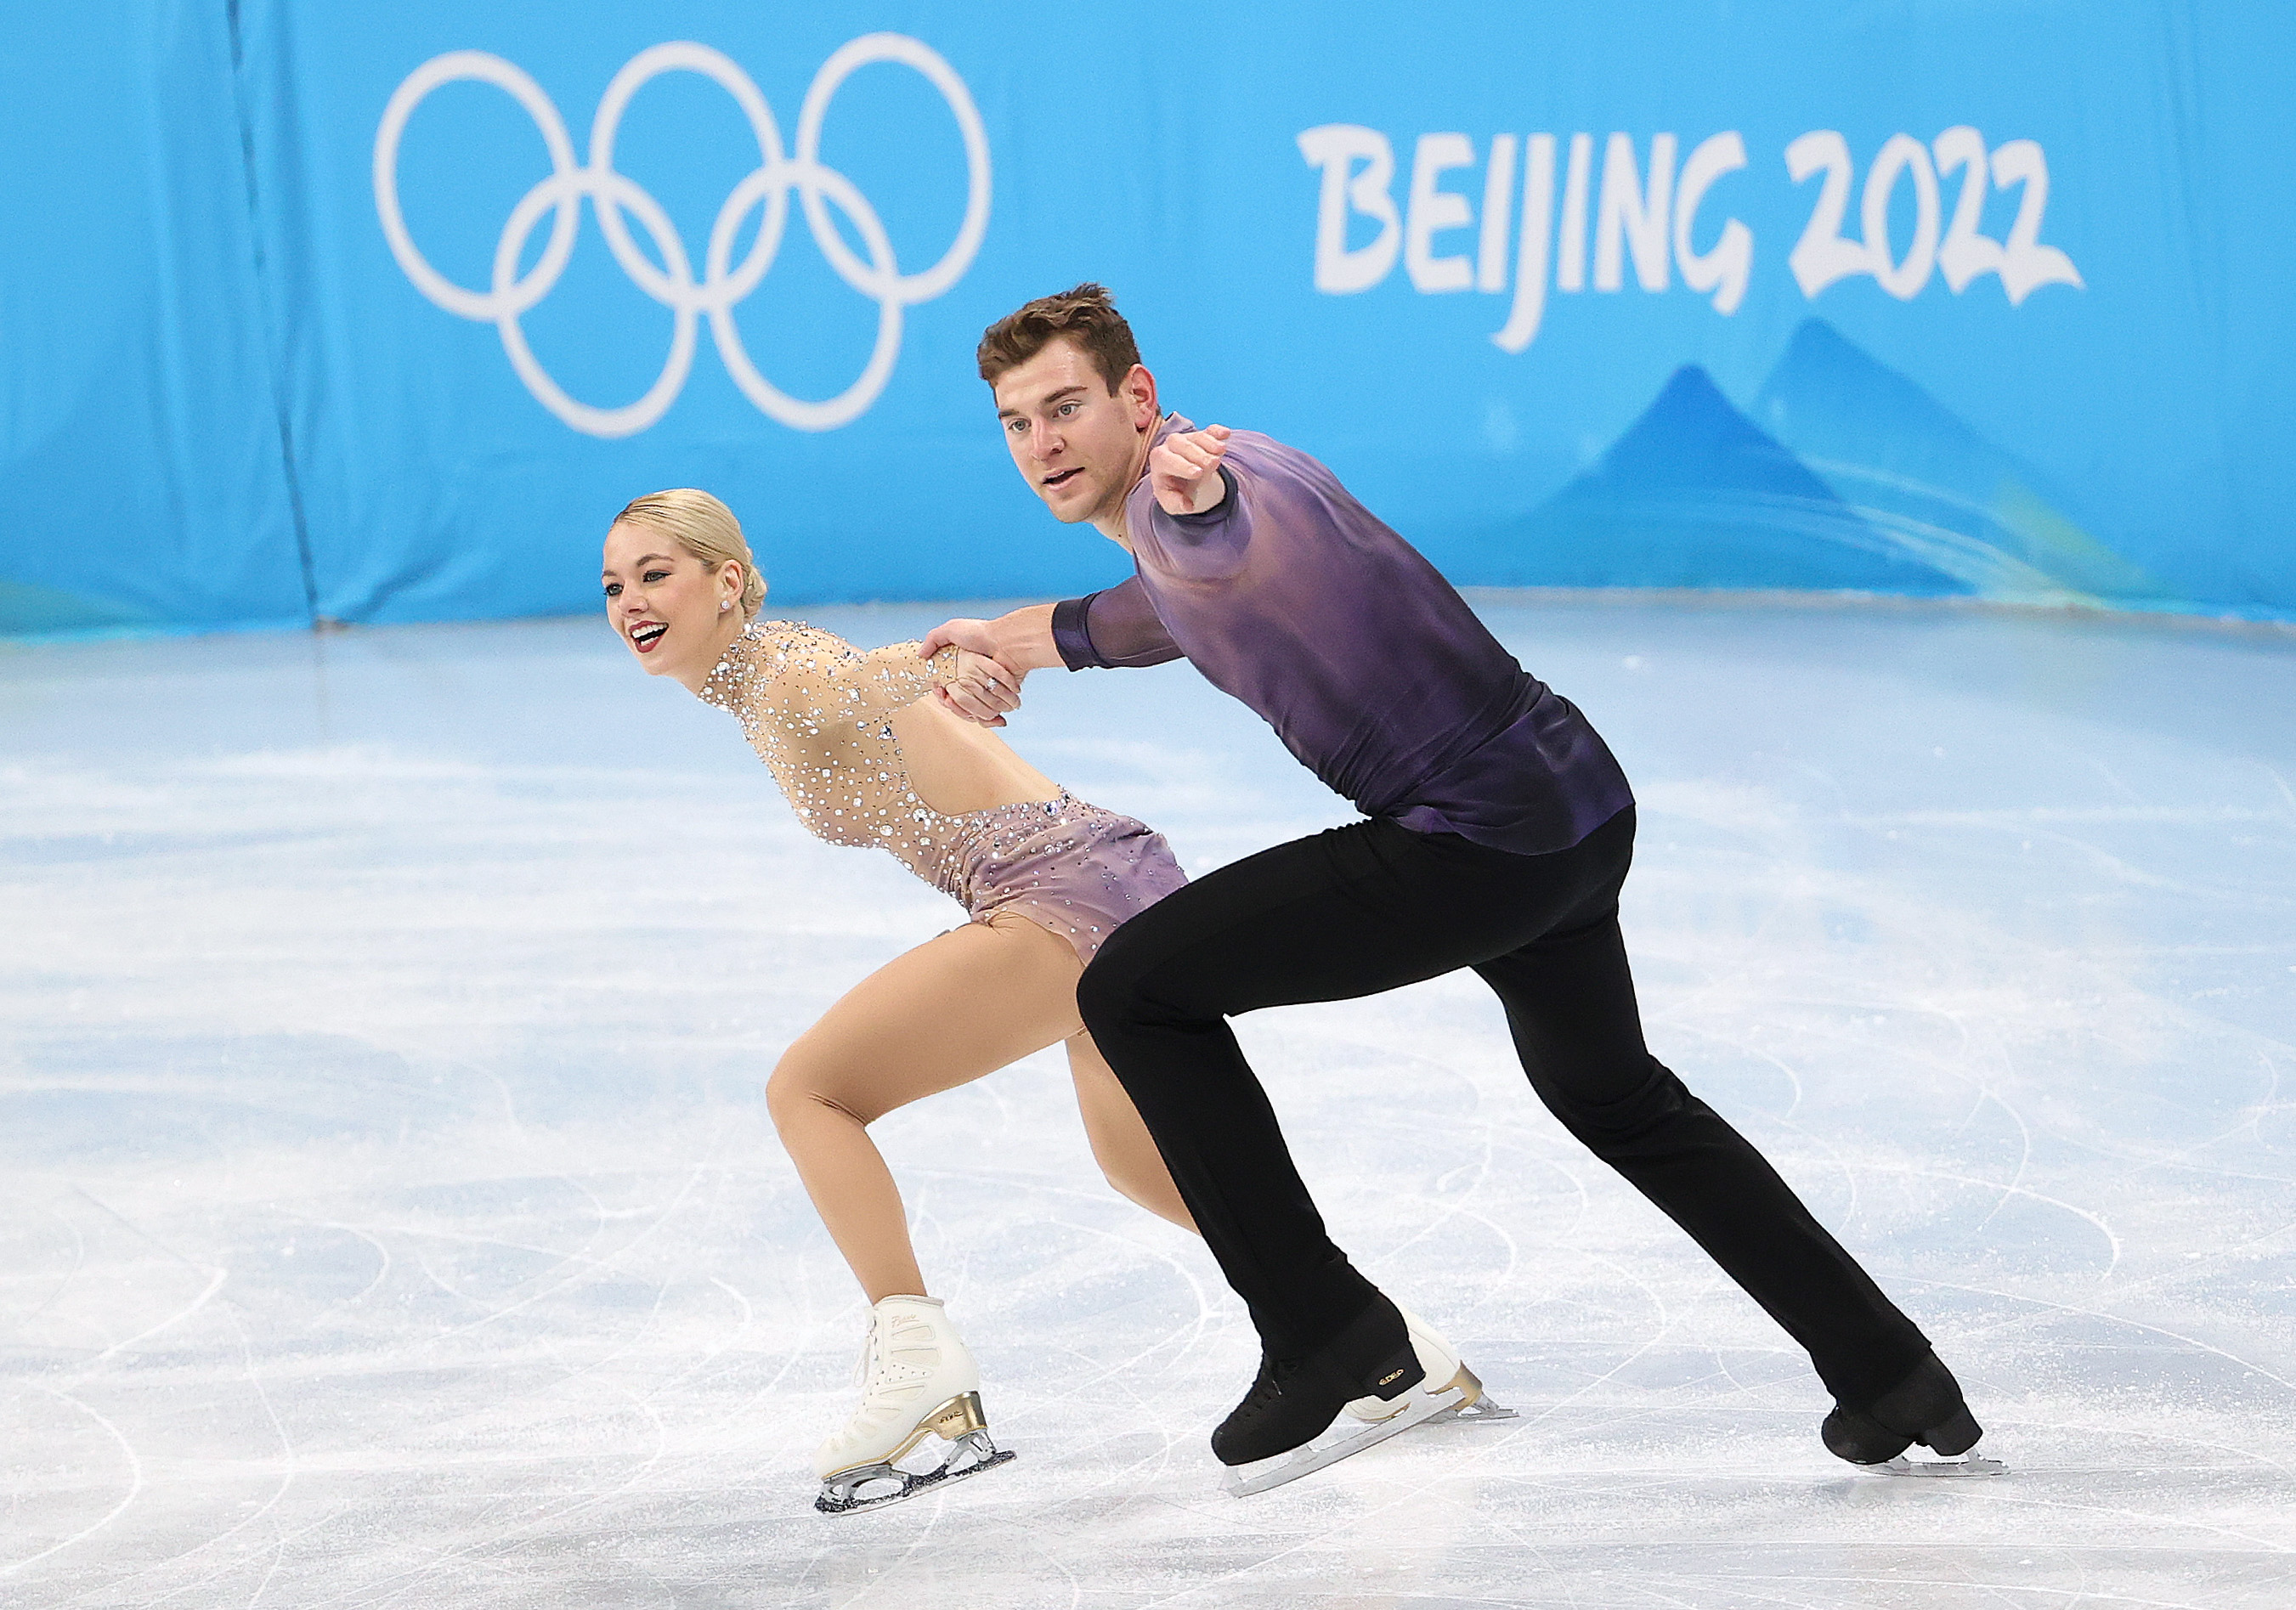 US skaters sued for song use at Olympics